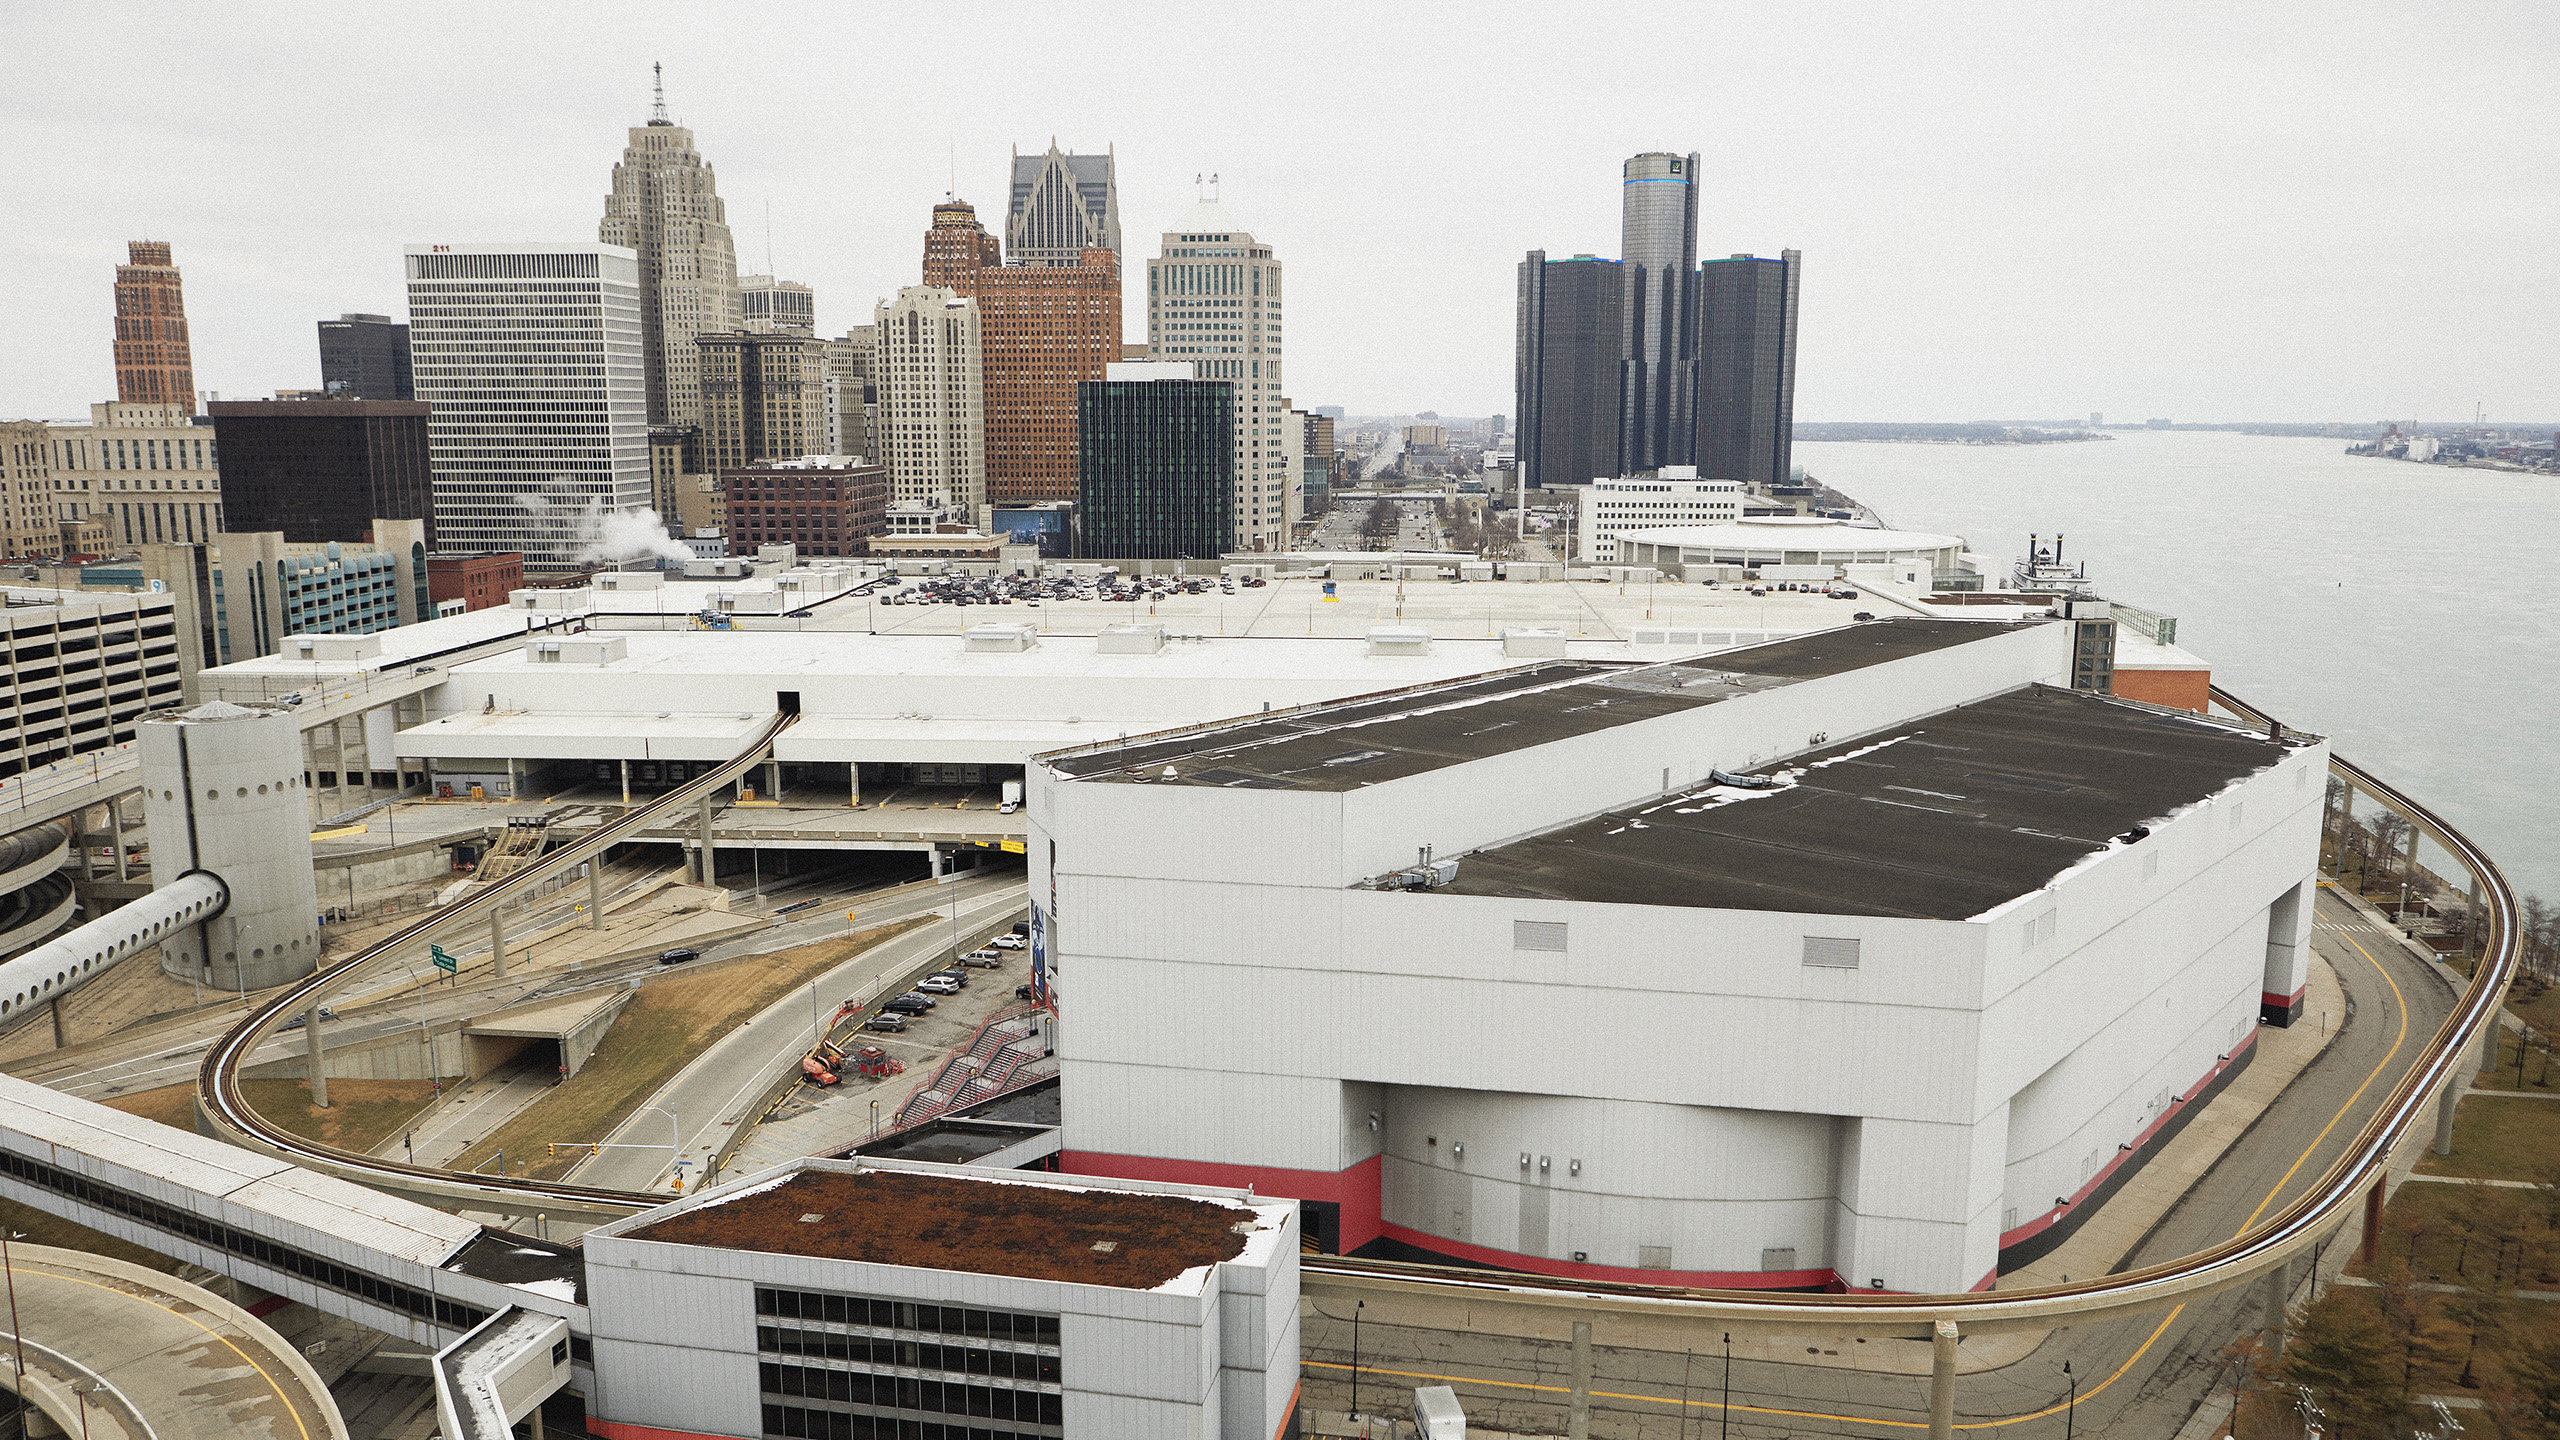 New Construction to Reach New Heights at Site of Joe Louis Arena